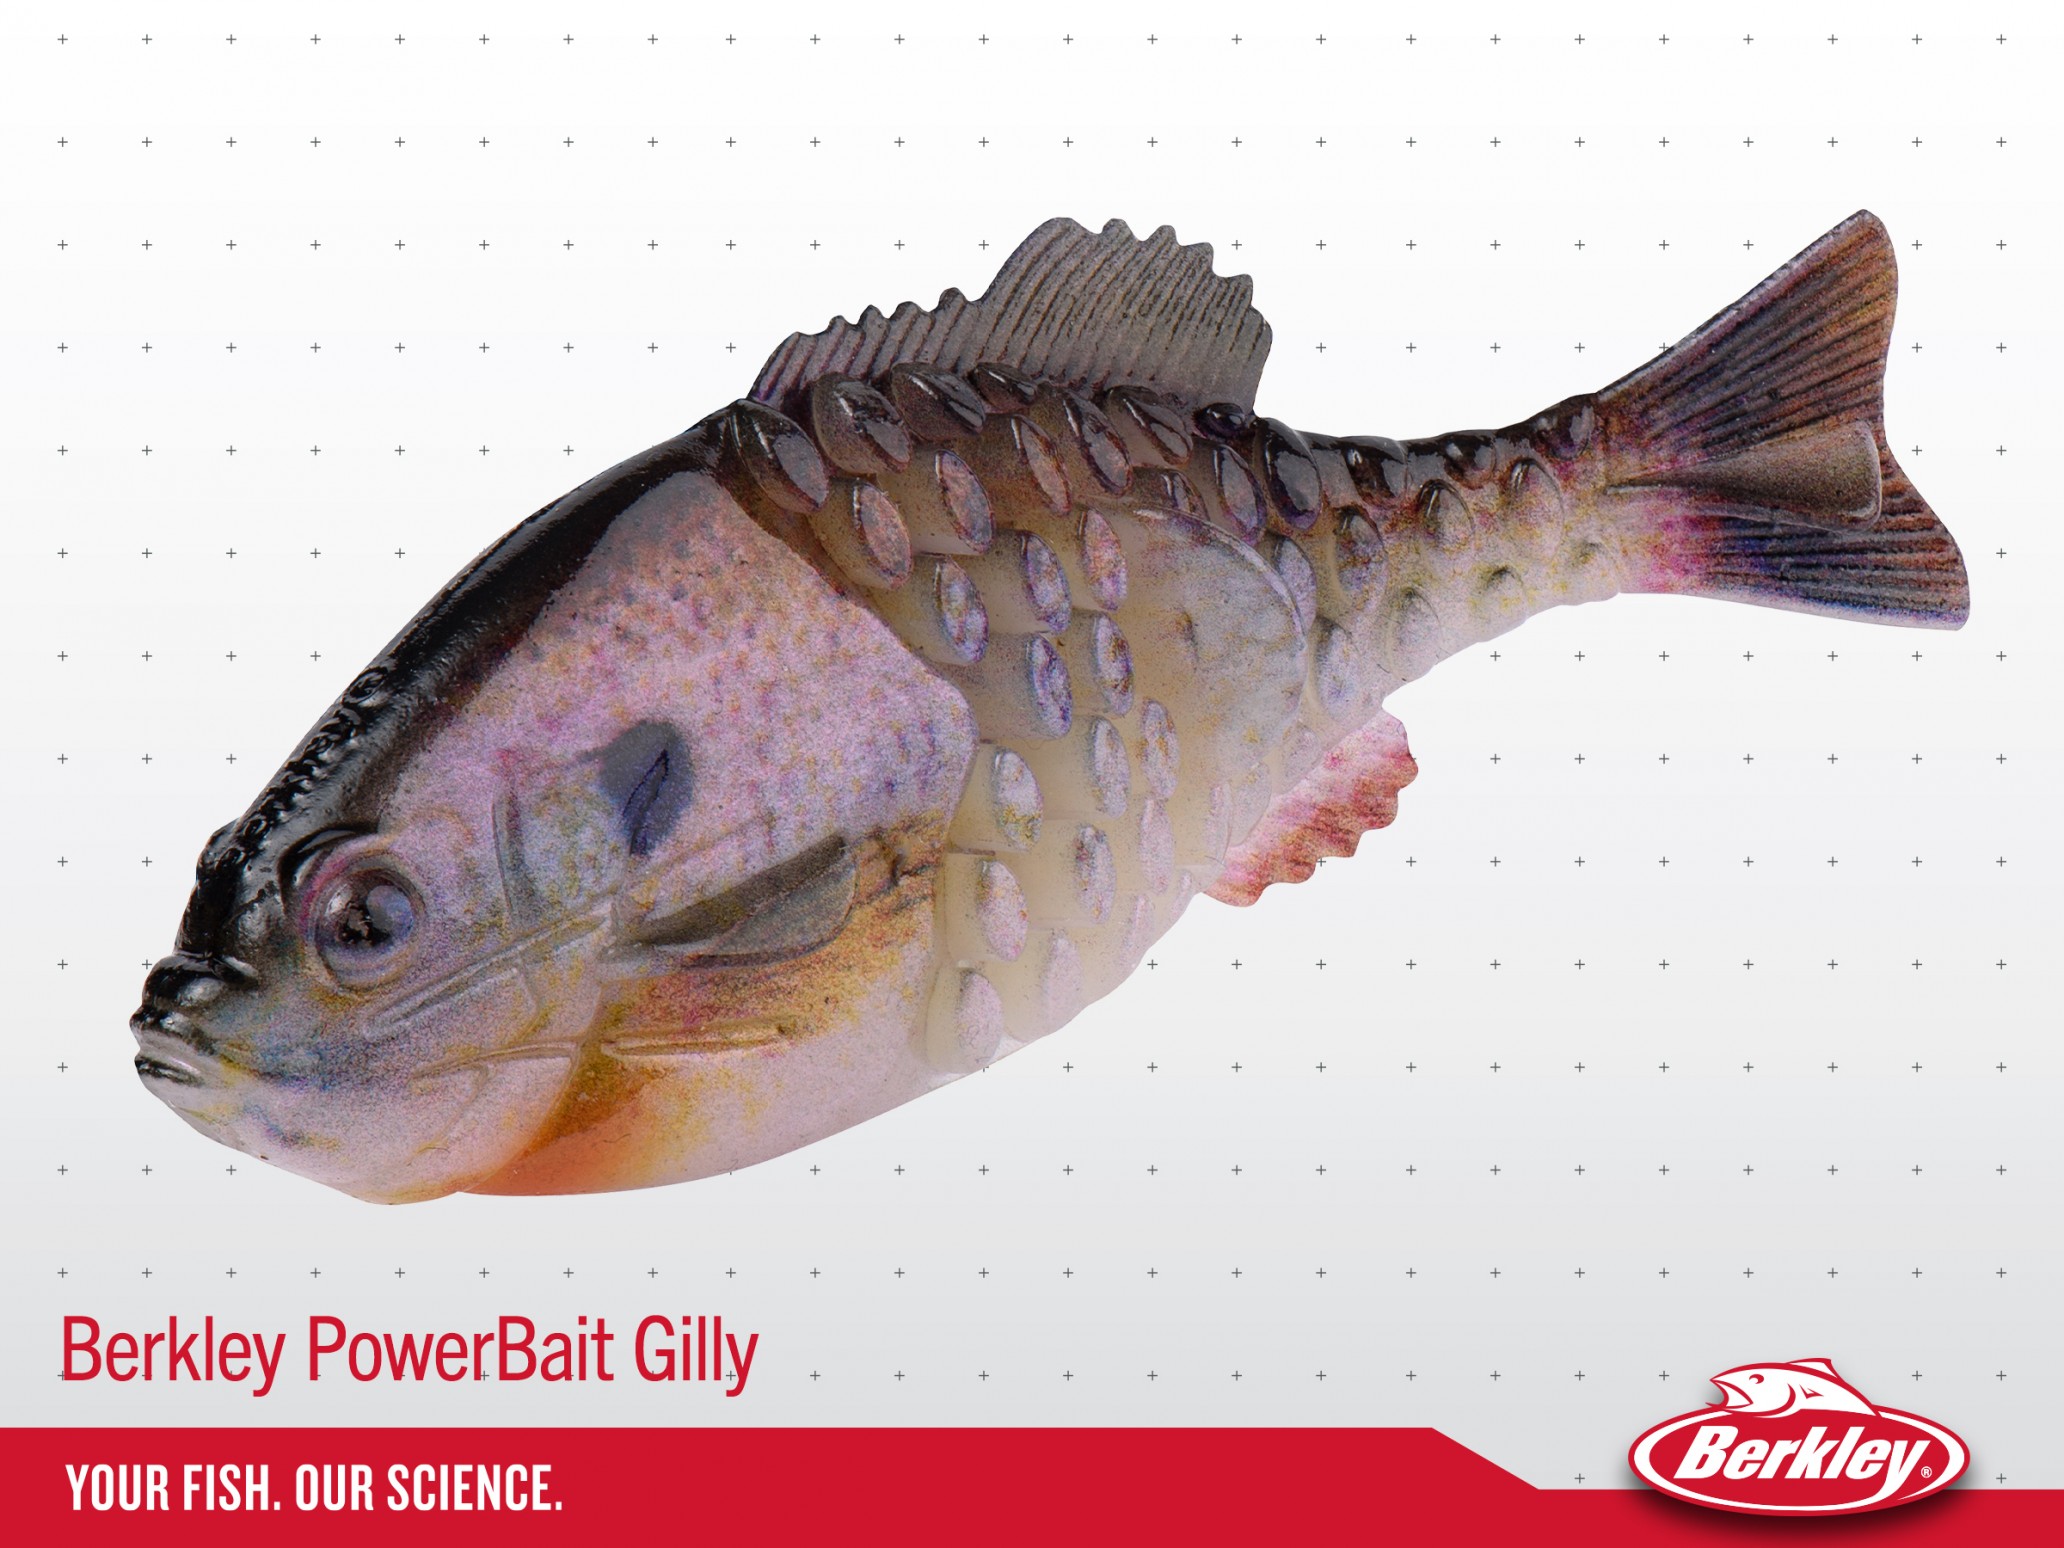 Berkley PowerBait Gilly Wins Best of Show at 2021 ICAST – Anglers Channel